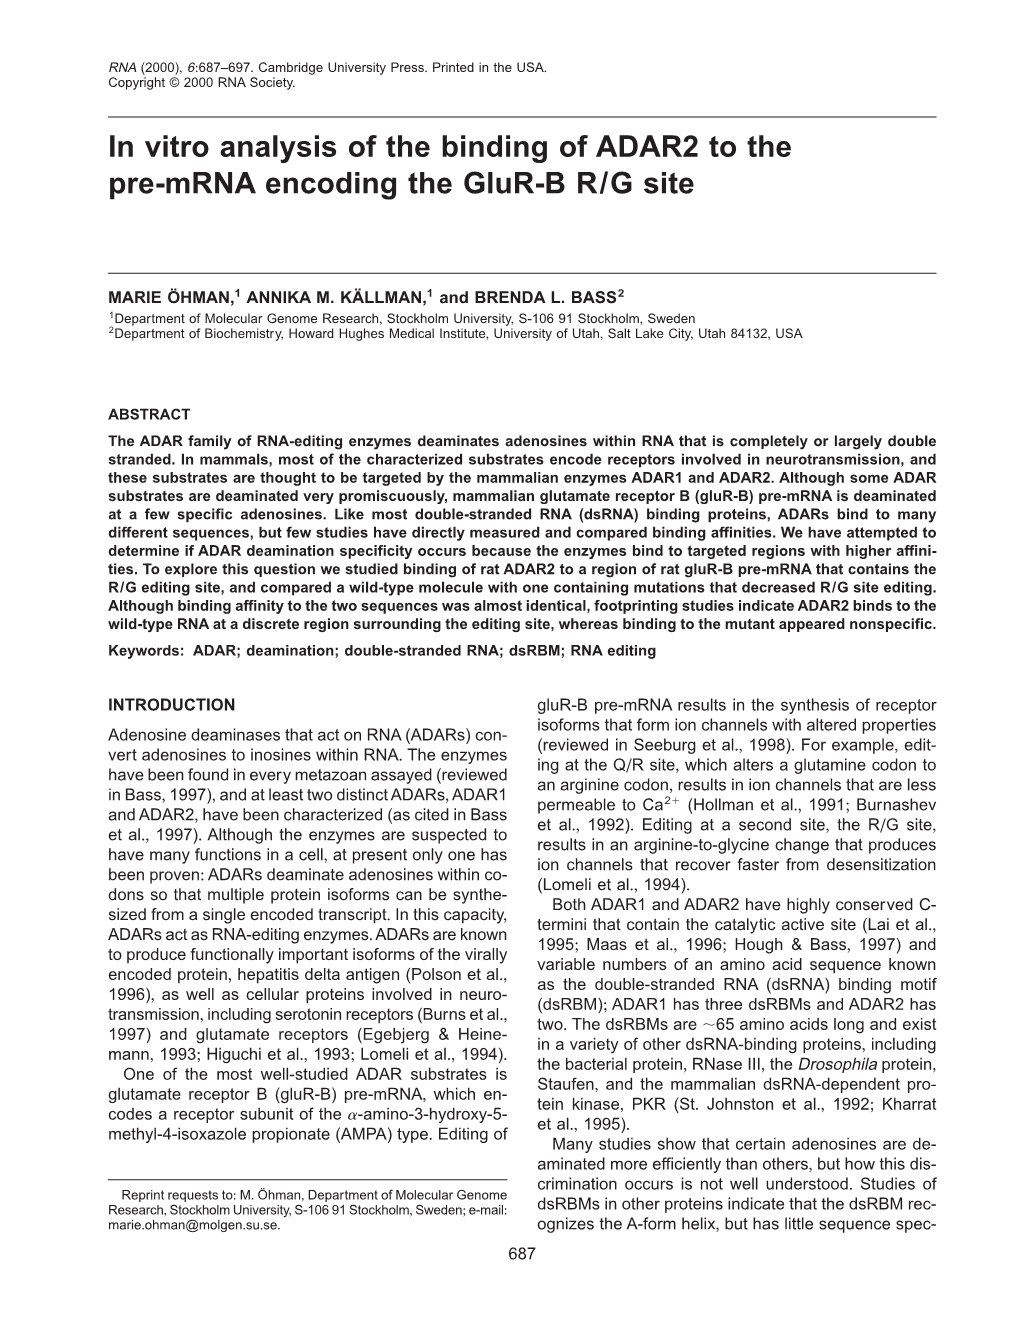 In Vitro Analysis of the Binding of ADAR2 to the Pre-Mrna Encoding the Glur-B R/G Site